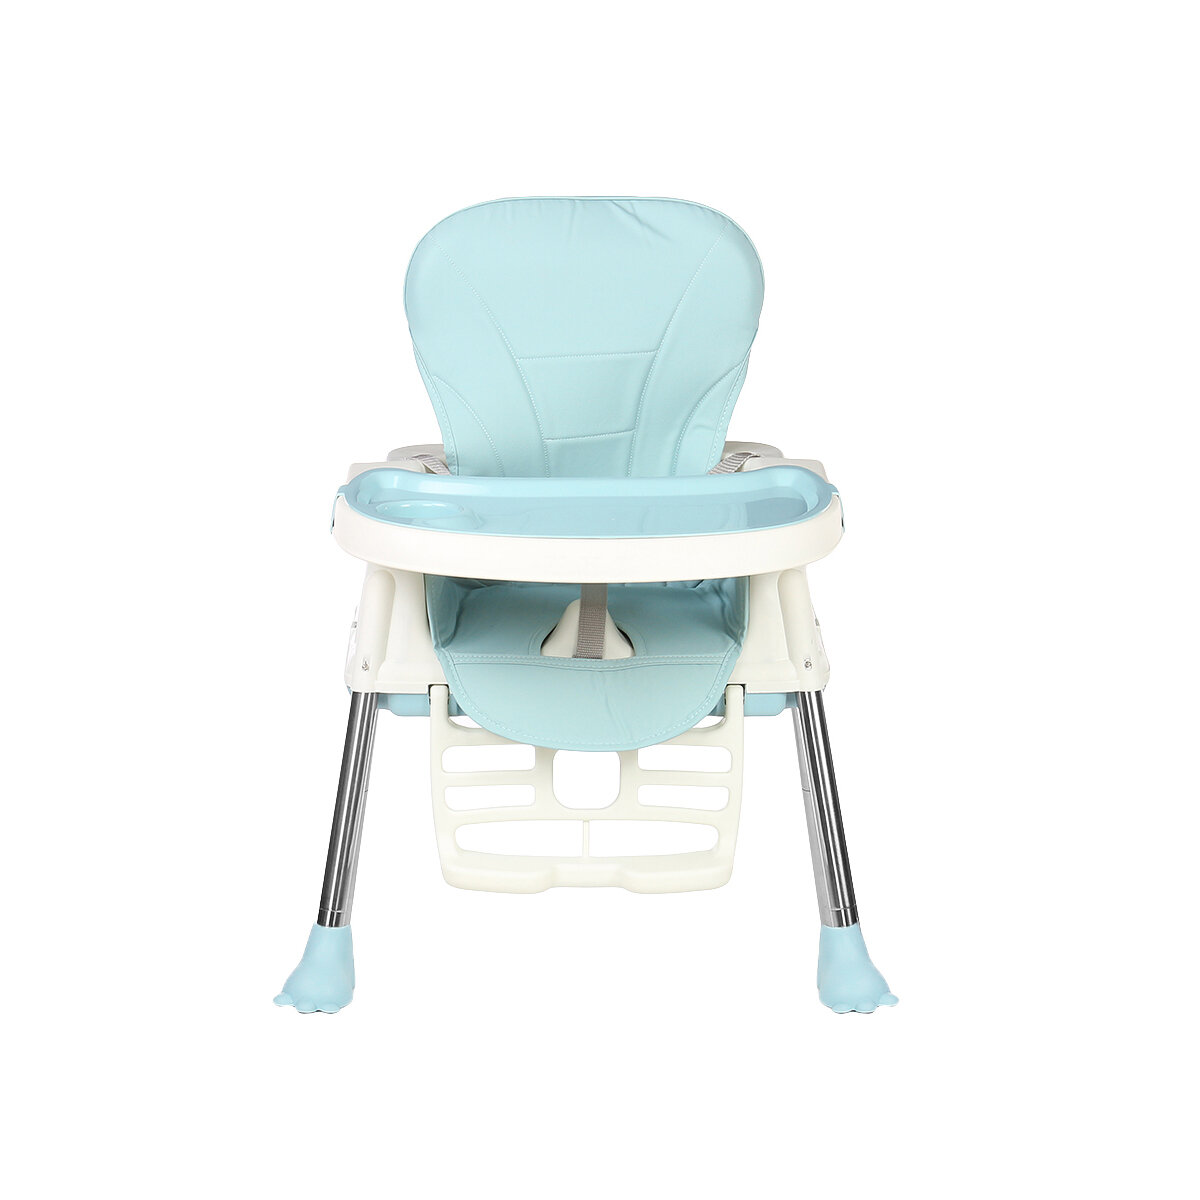 Image of Baby Dining Chair Multifunctional Portable Foldable Safe Children Feeding Chair